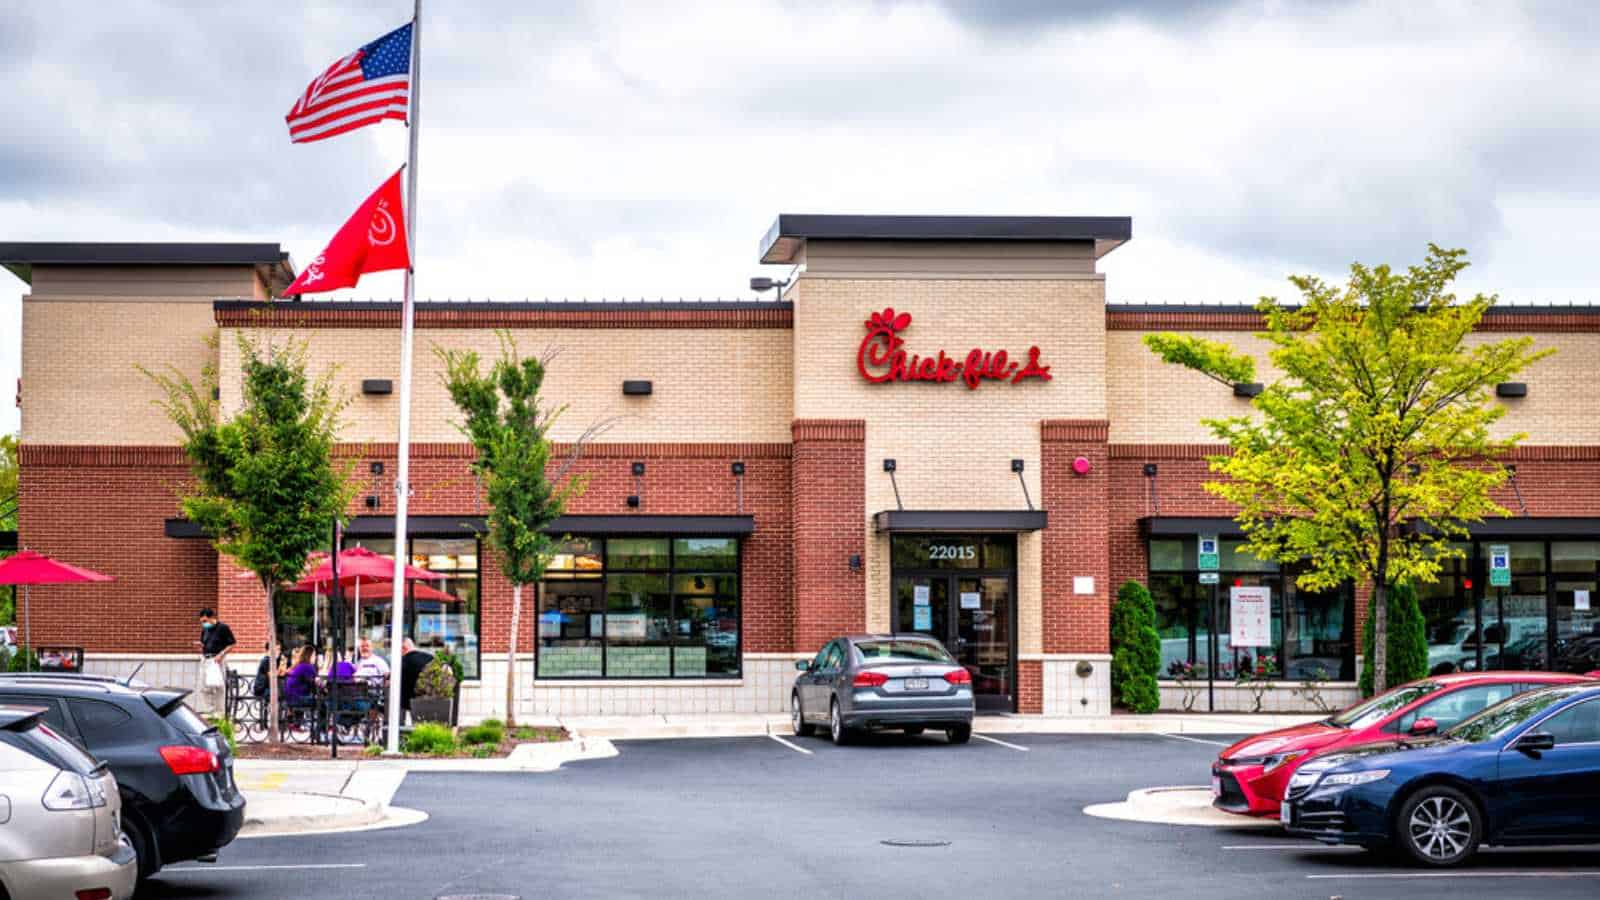 Columbus,Ohio/USA April 24, 2019: Chick-fil-A is an American fast food restaurant chain headquartered in the city of College Park, Georgia, specializing in chicken sandwiches.